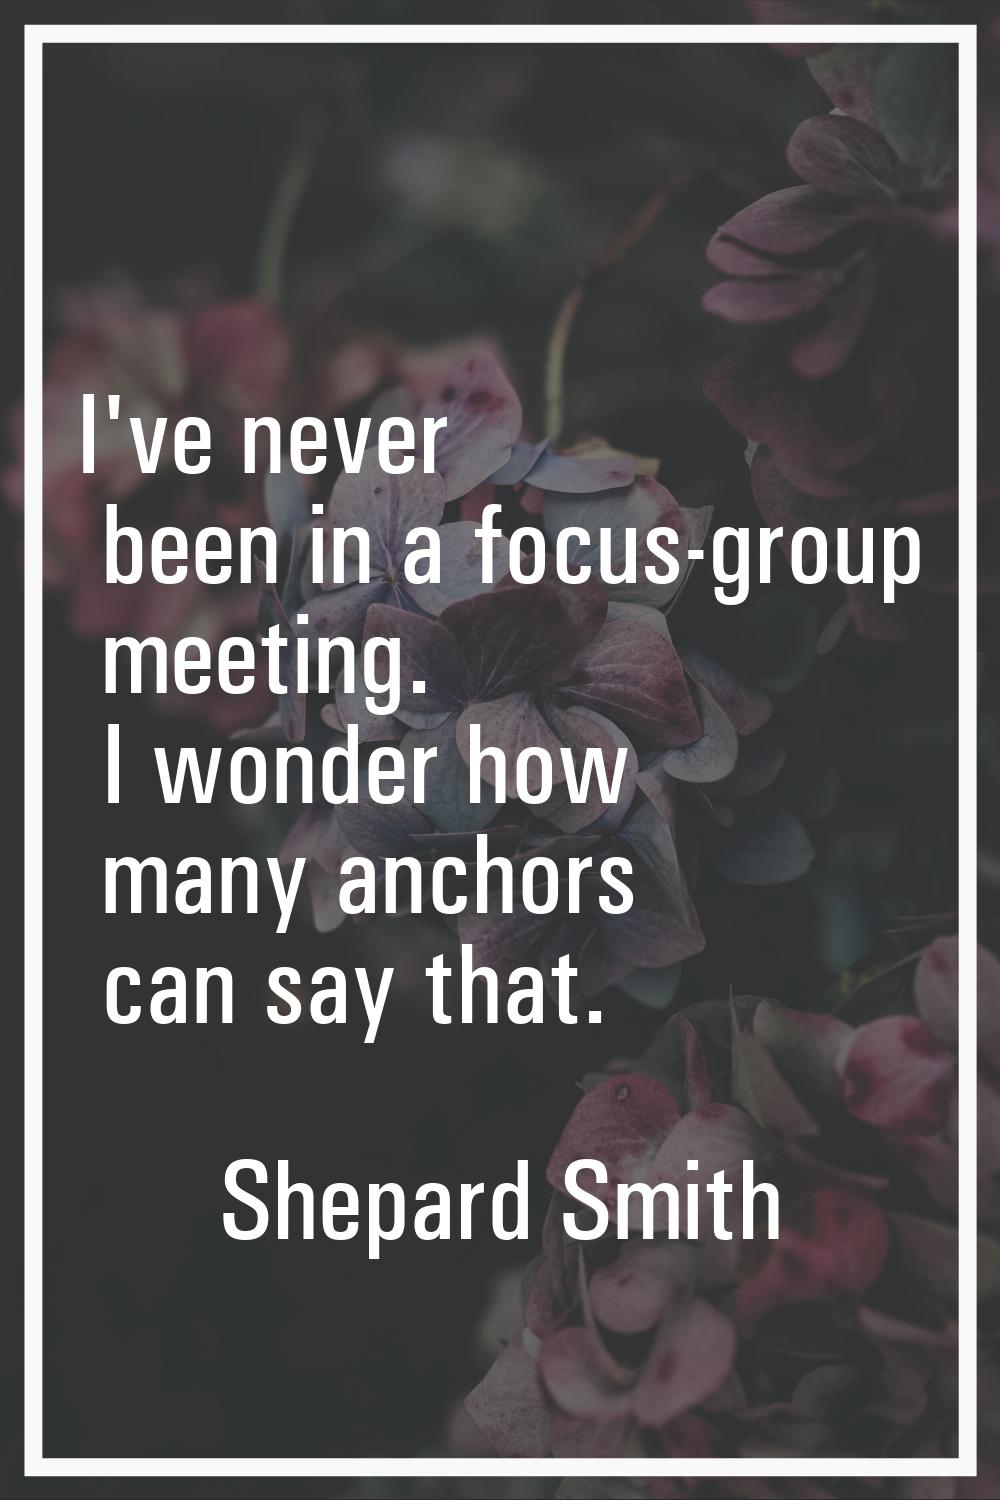 I've never been in a focus-group meeting. I wonder how many anchors can say that.